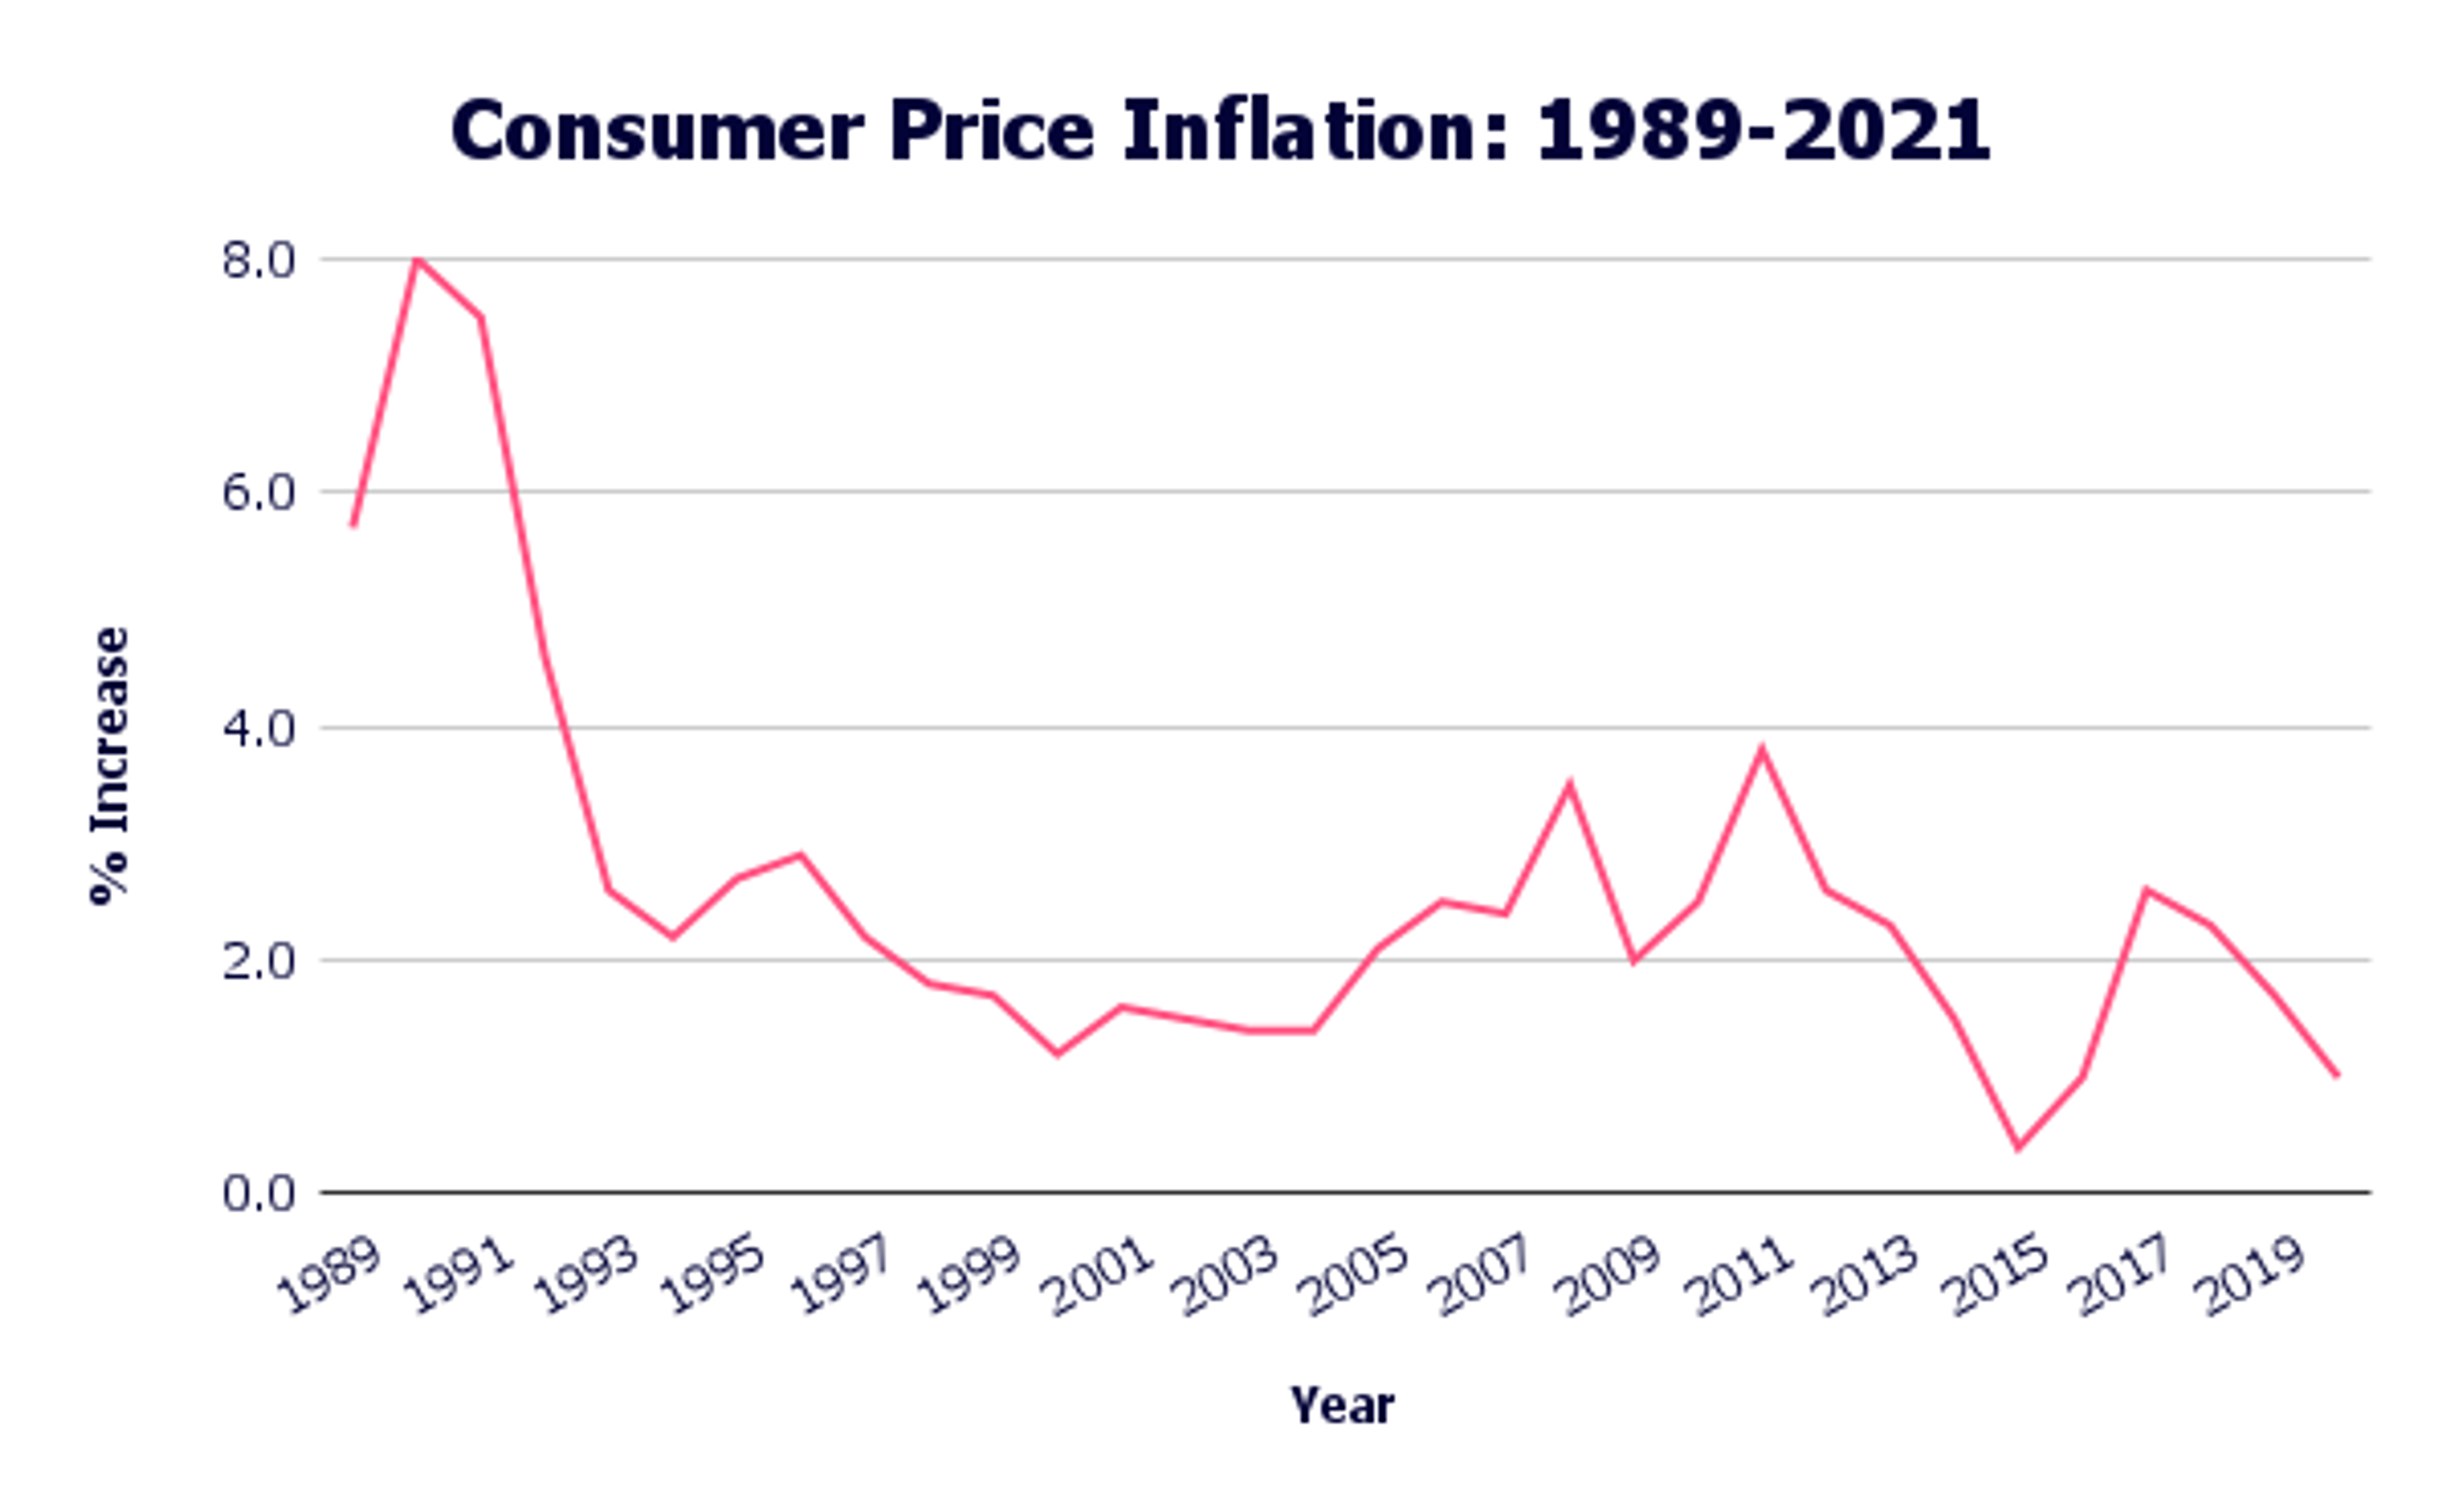 Line chart showing Consumer Price Inflation since 1989